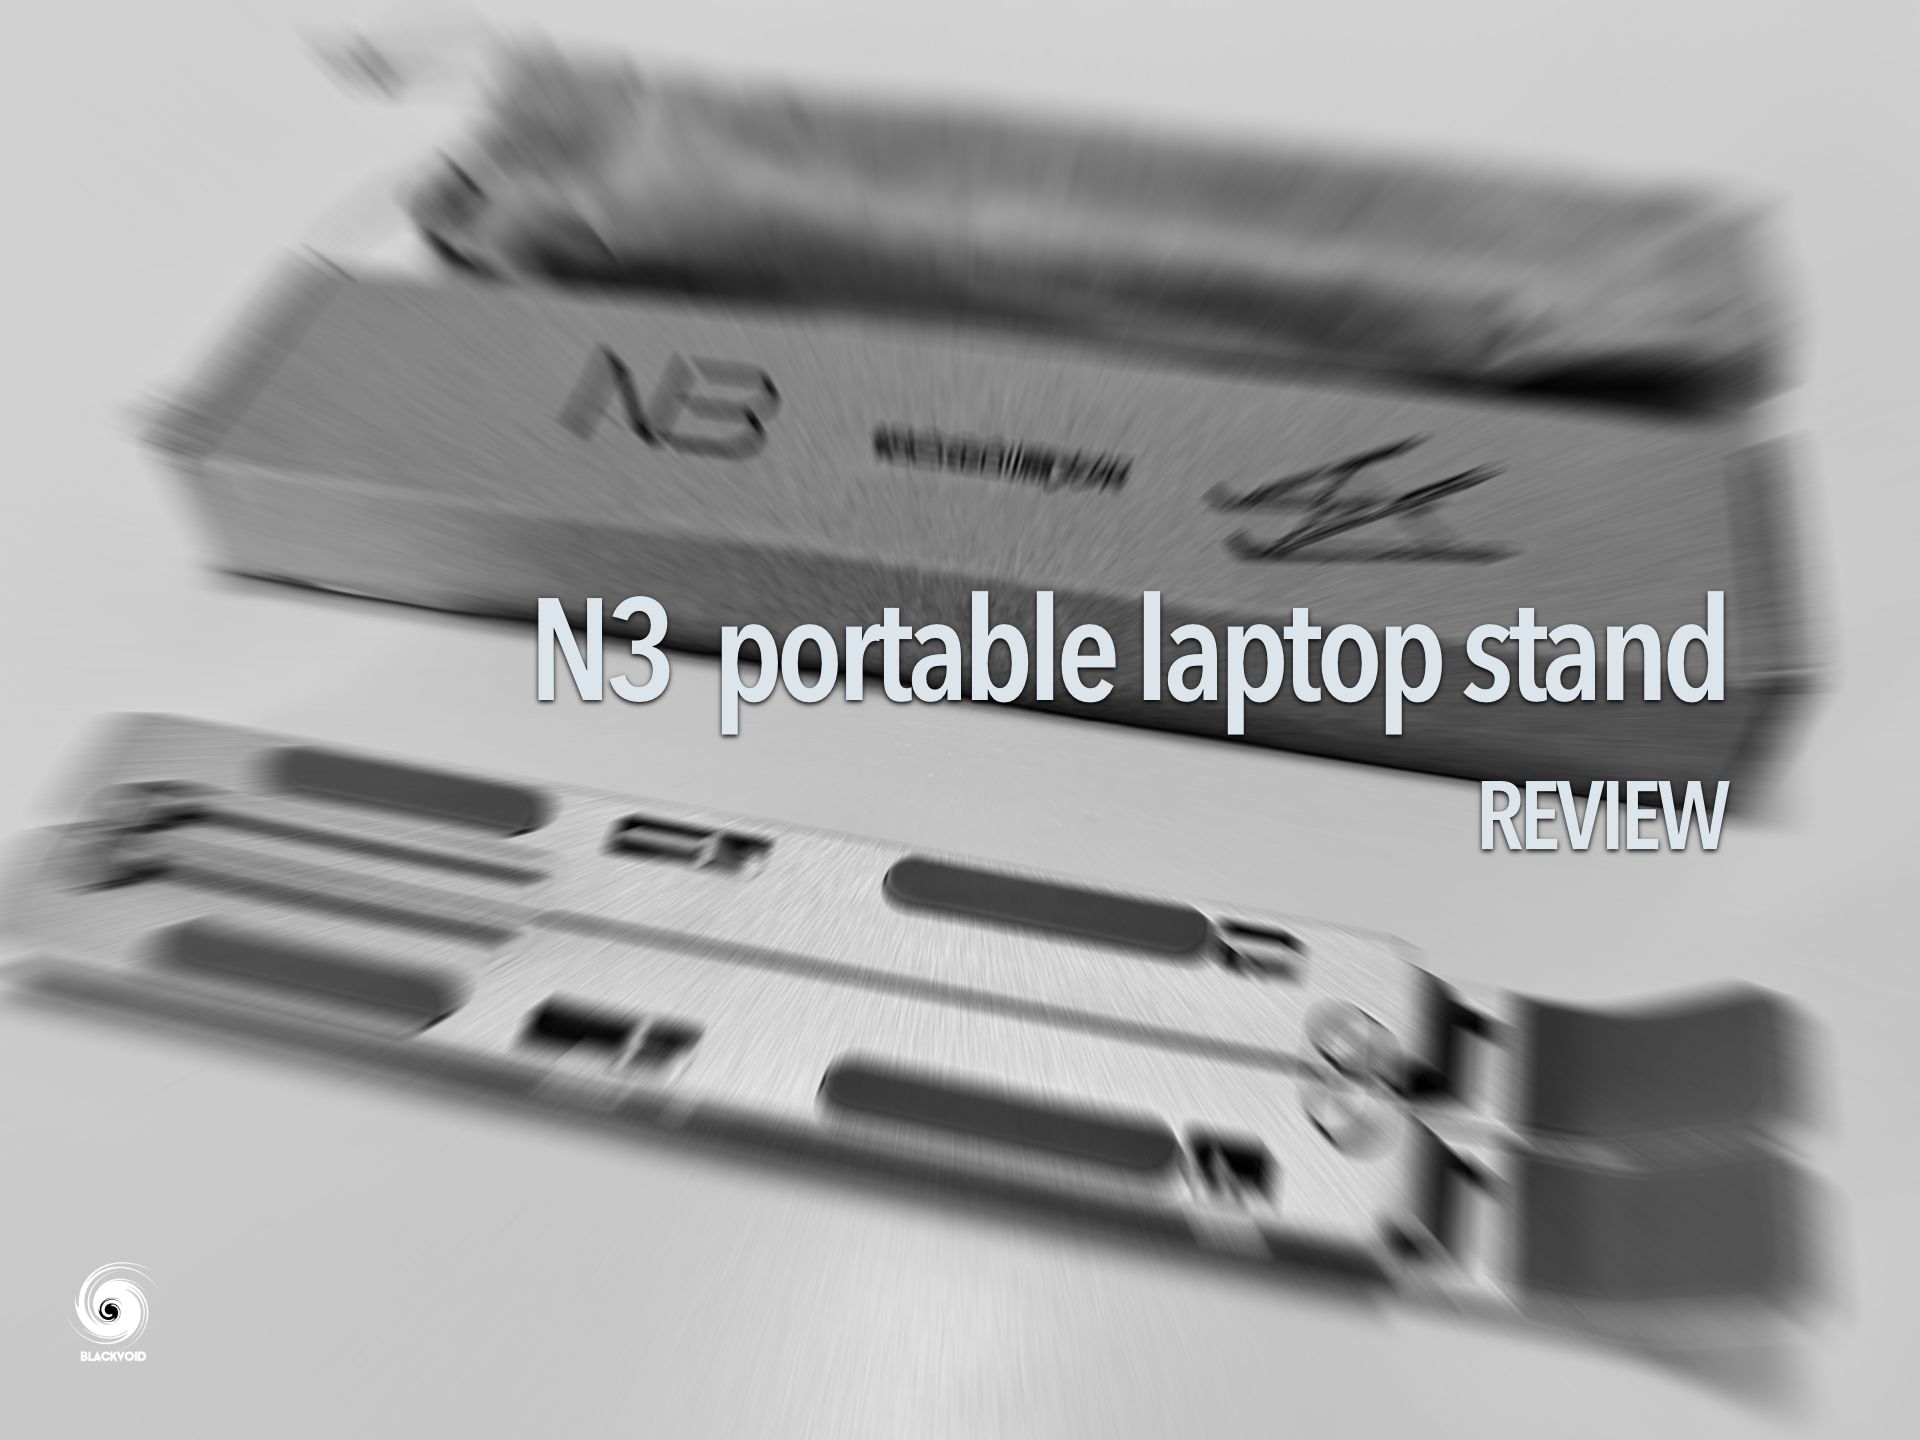 N3 portable laptop stand